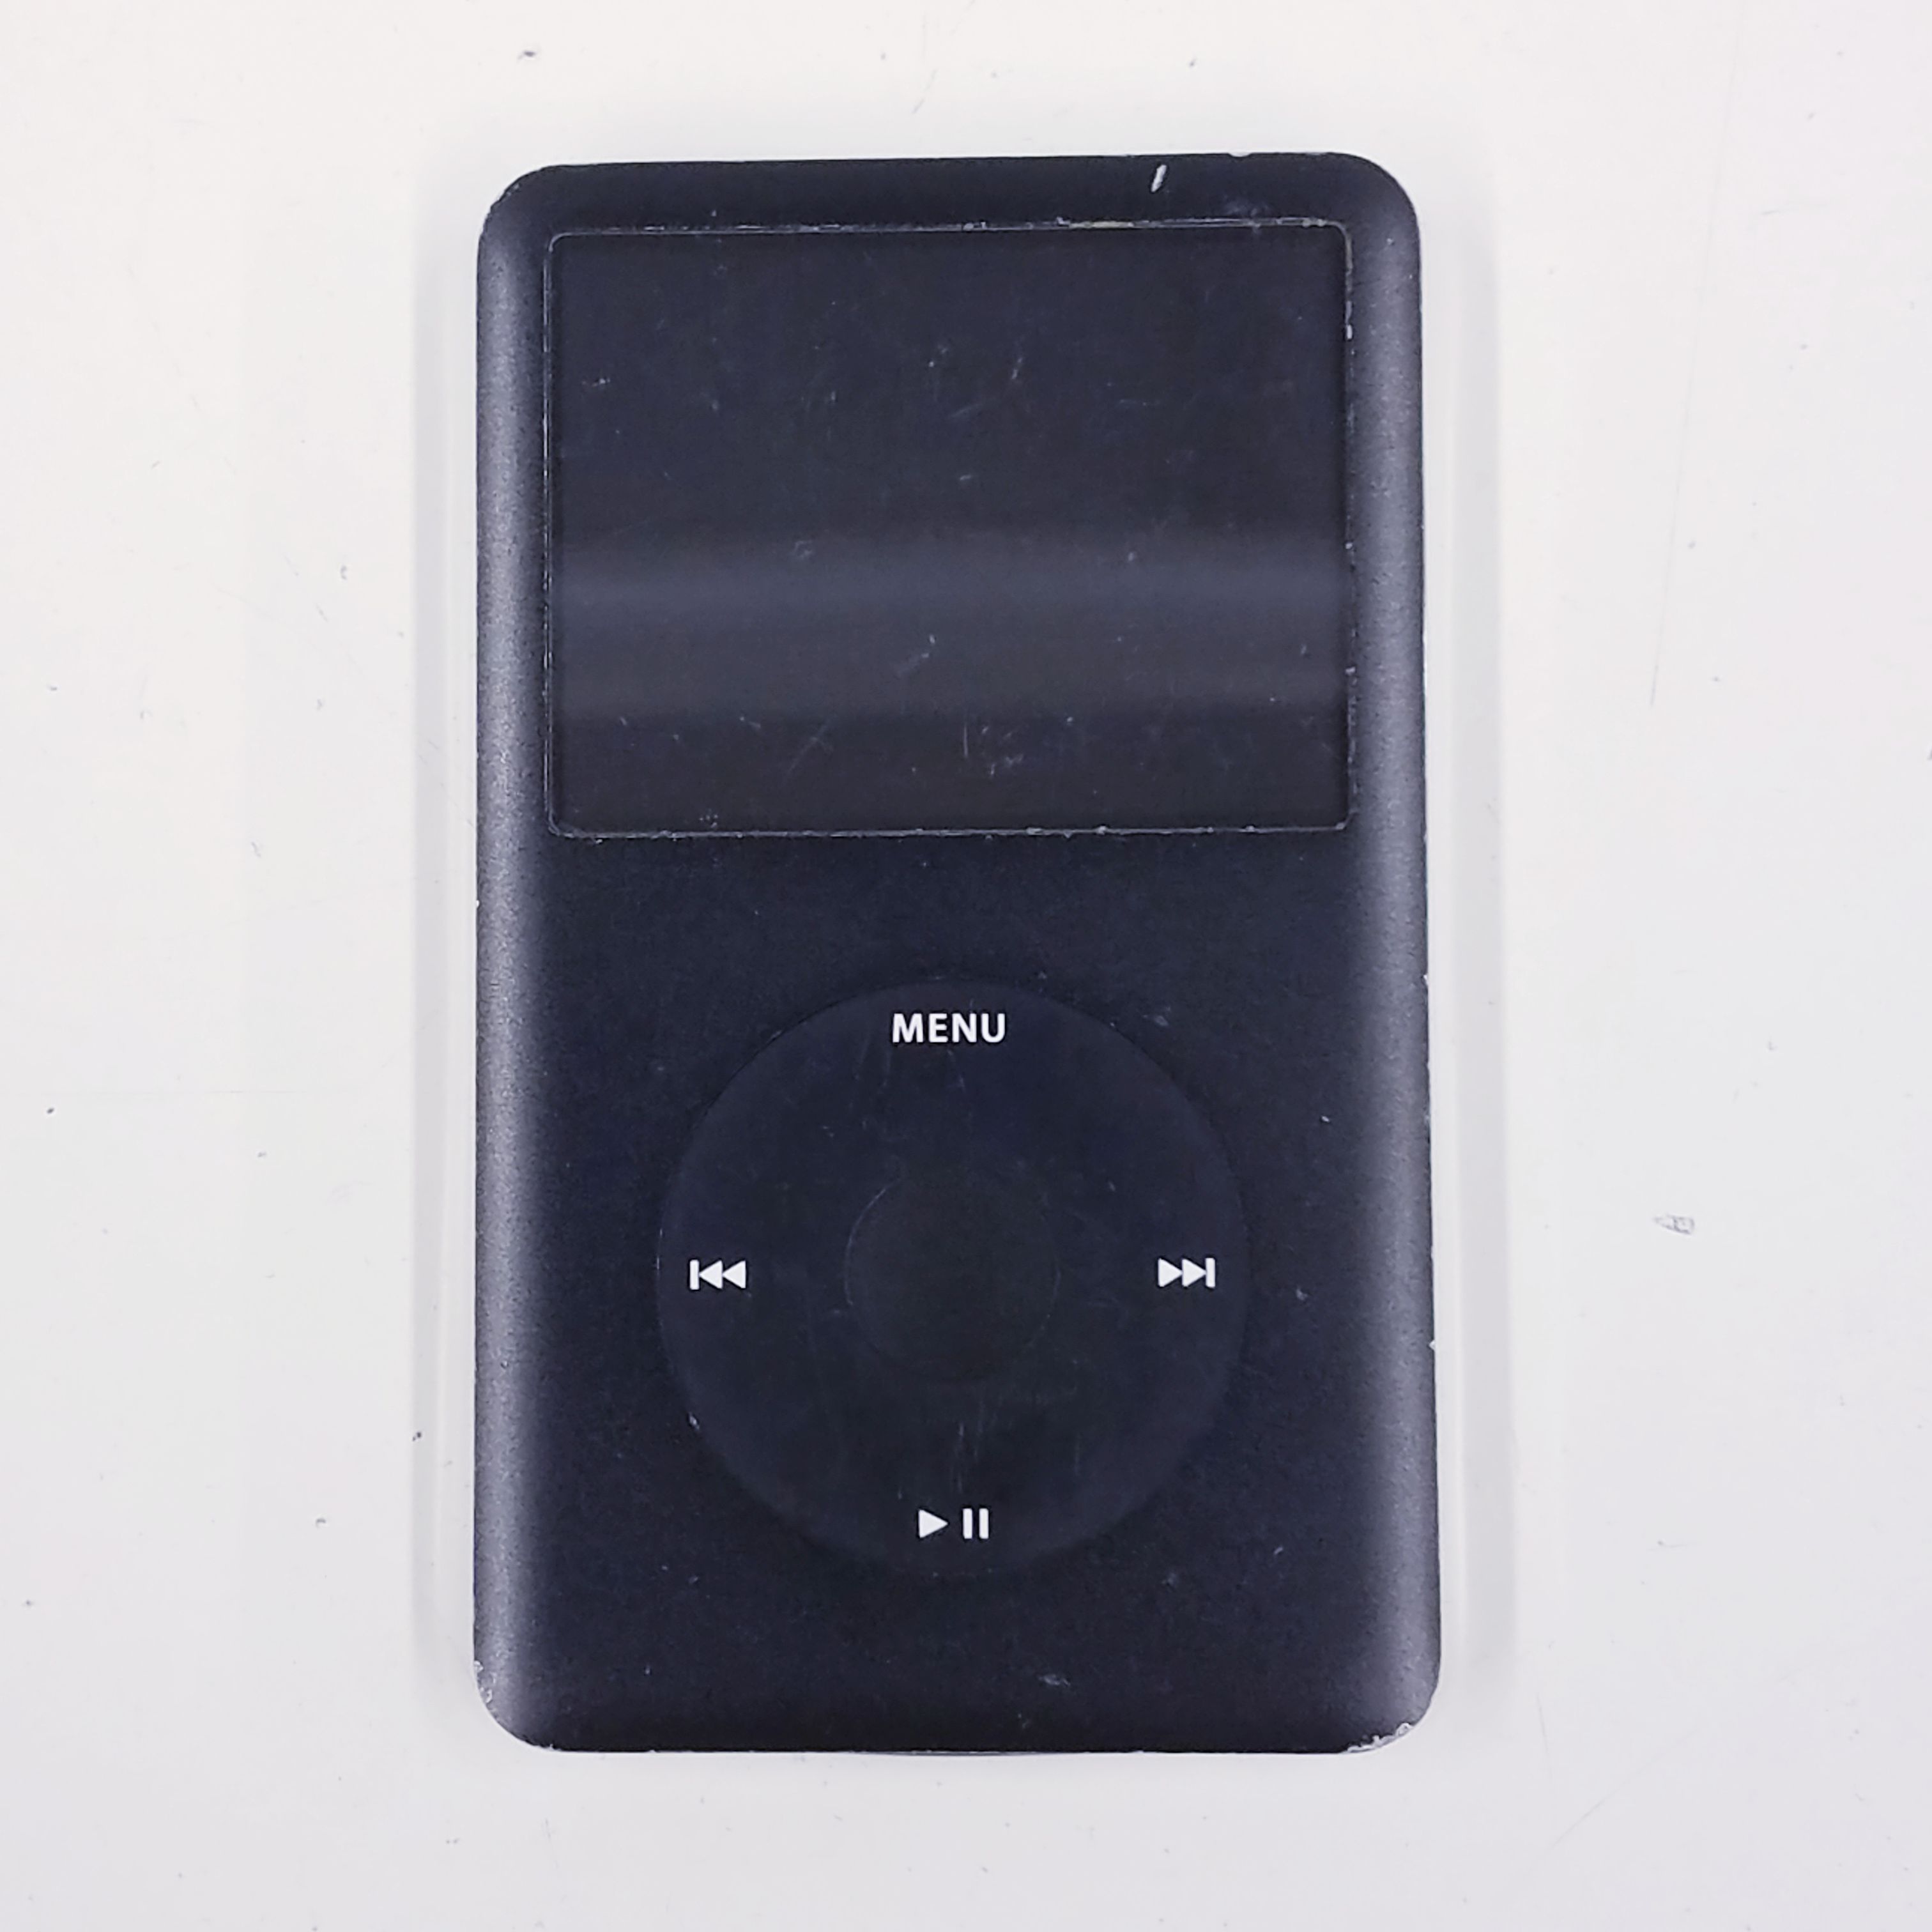 Apple iPod Classic 6th Generation - A1238 - 80GB - SILVER & BLACK - Tested